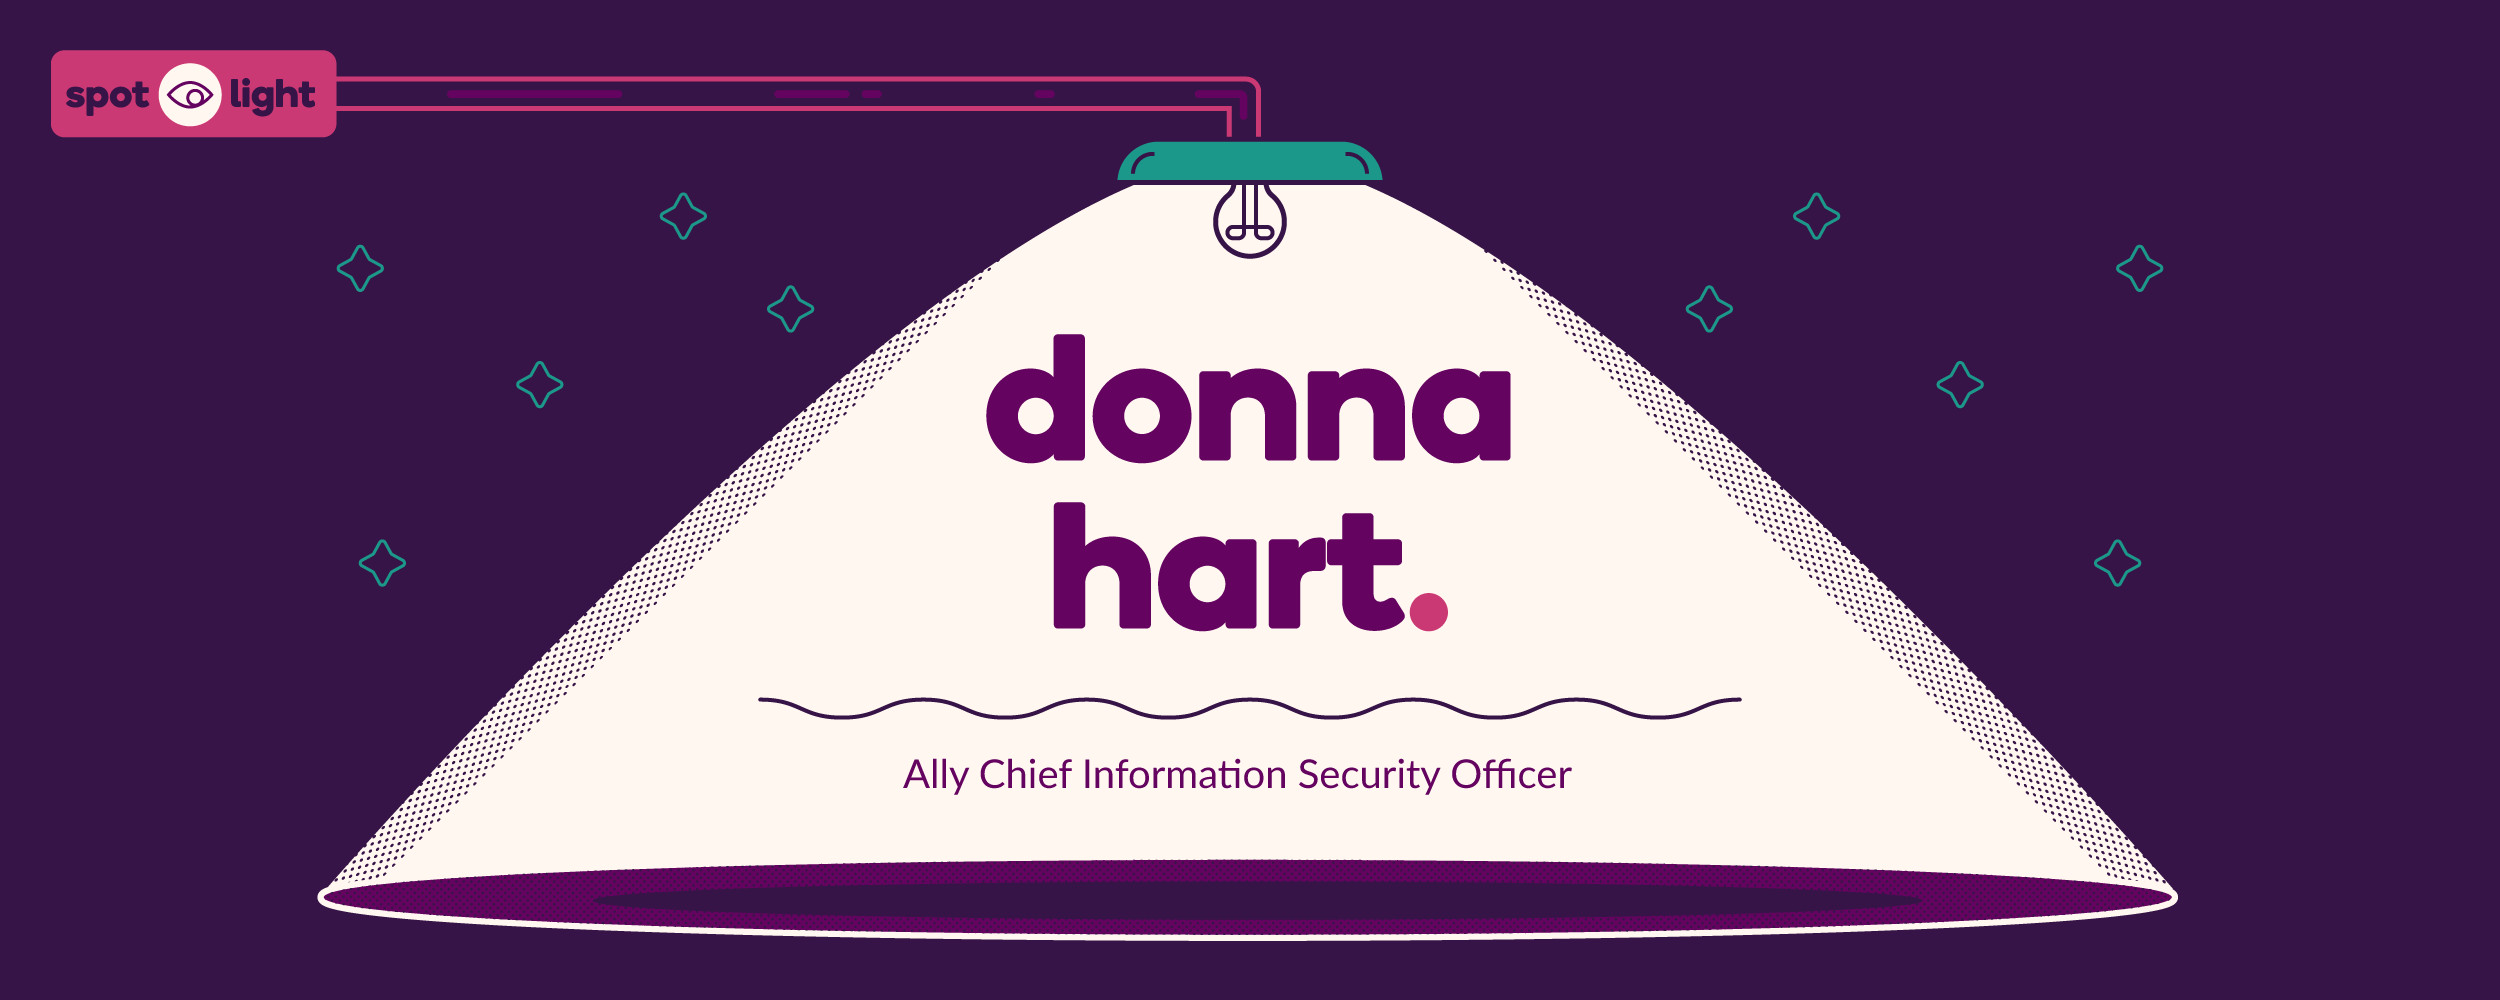 Illustration: On a dark purple background with mint green outlined stars, a pink rectangular box with a dark purple outlined eye on a white circle splits up the word "Spotlight." Two pink lines portray an arm to the top of a mint green overhead light with a dark purple outlined lightbulb illuminating a light pink area that says "Donna Hart. Ally Chief Information Security Officer" for this women in technology feature.